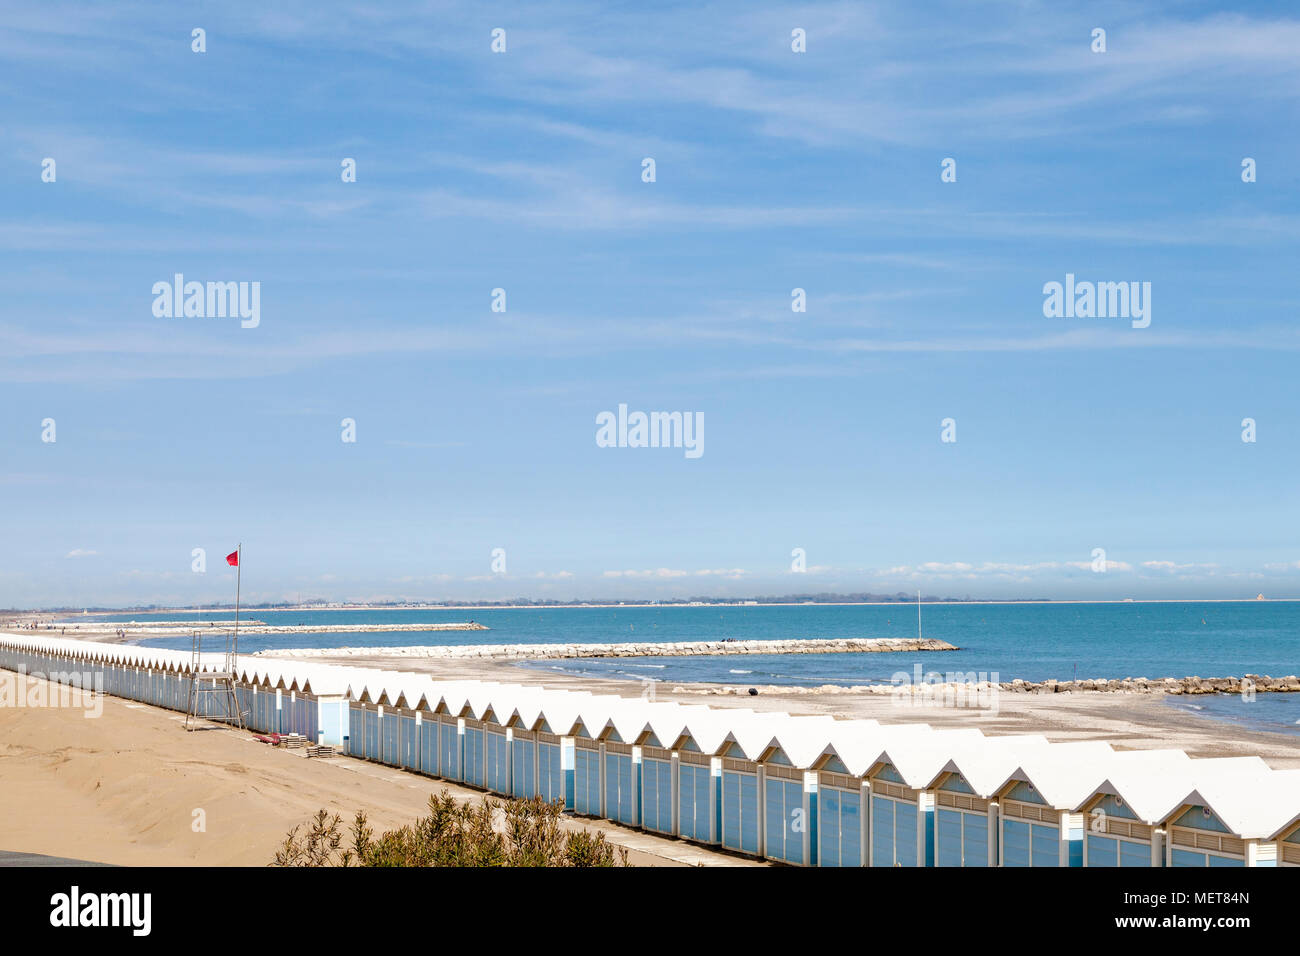 The beach in Lido di Venezia (Venice Lido) with a long line of cabanas (Beach huts), Lido, Venice, Veneto, Italy and a view over the breakwaters in th Stock Photo